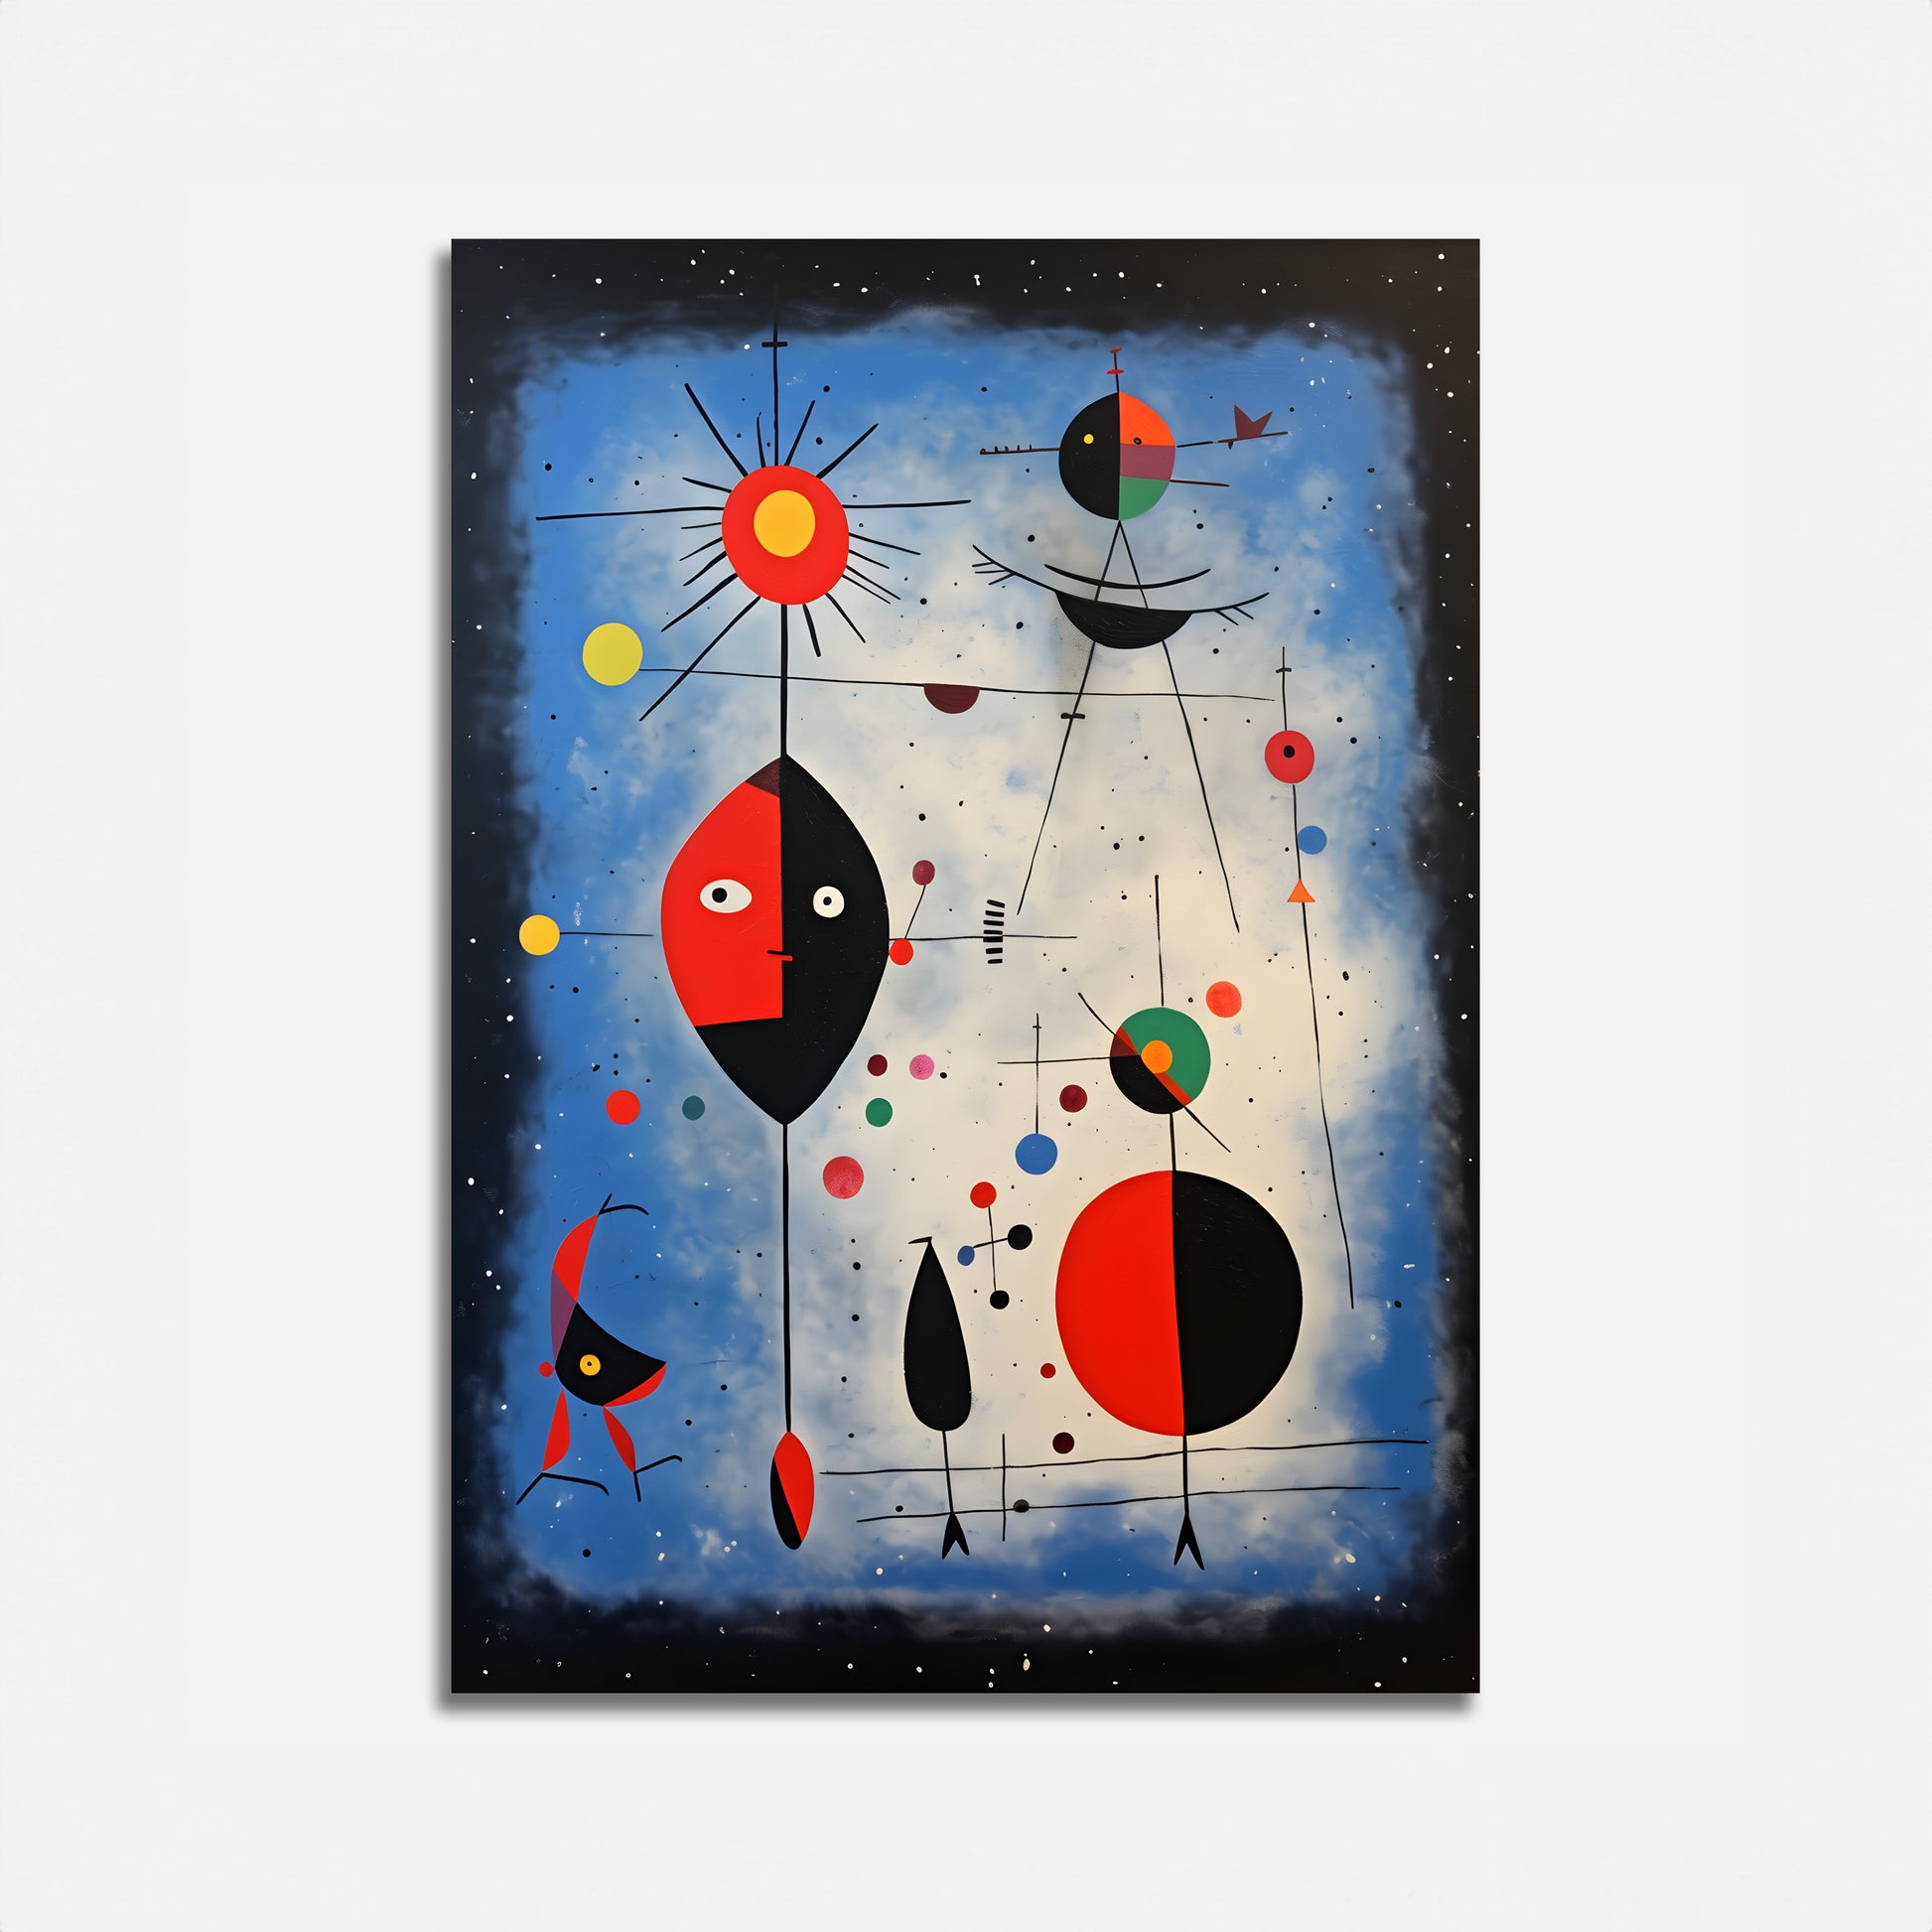 A vibrant abstract painting with geometric shapes and celestial motifs on a dark background.